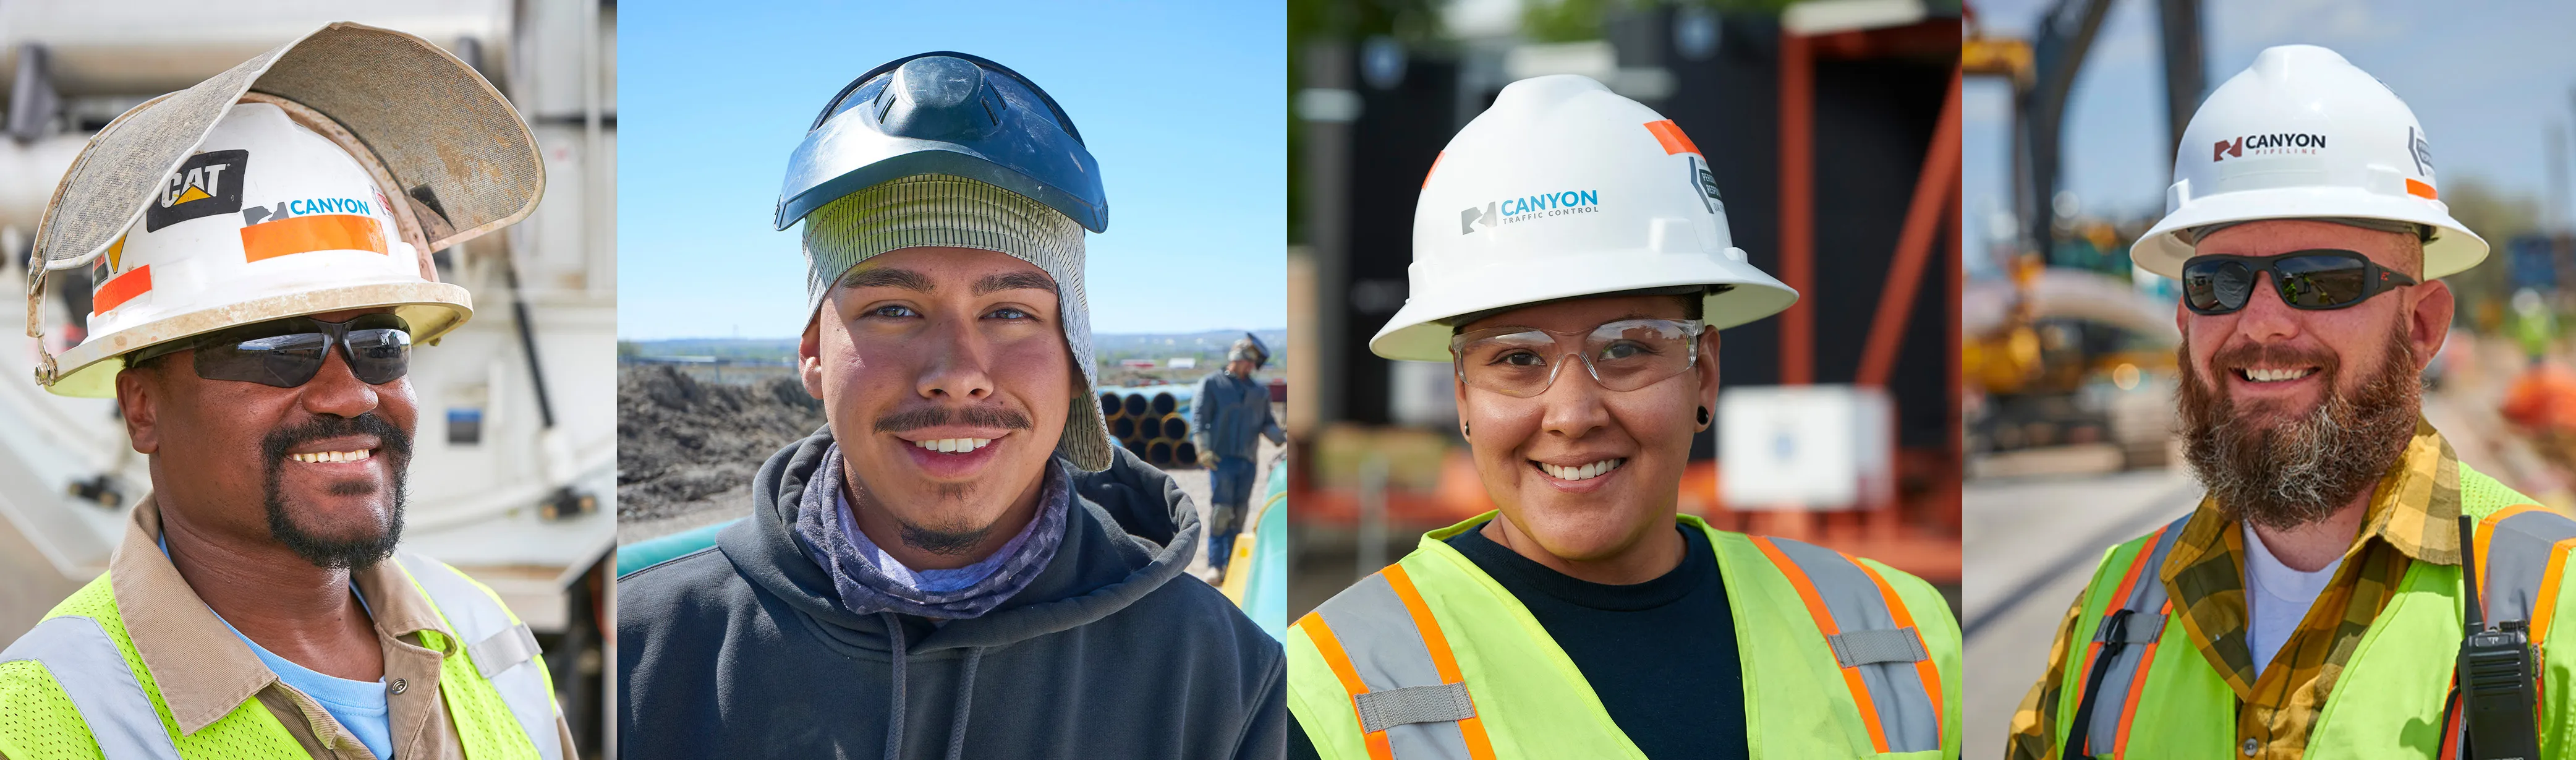 Canyon Pipeline One Team Big Impact, image showing 4 different Canyon Pipeline team members wearing their PPE